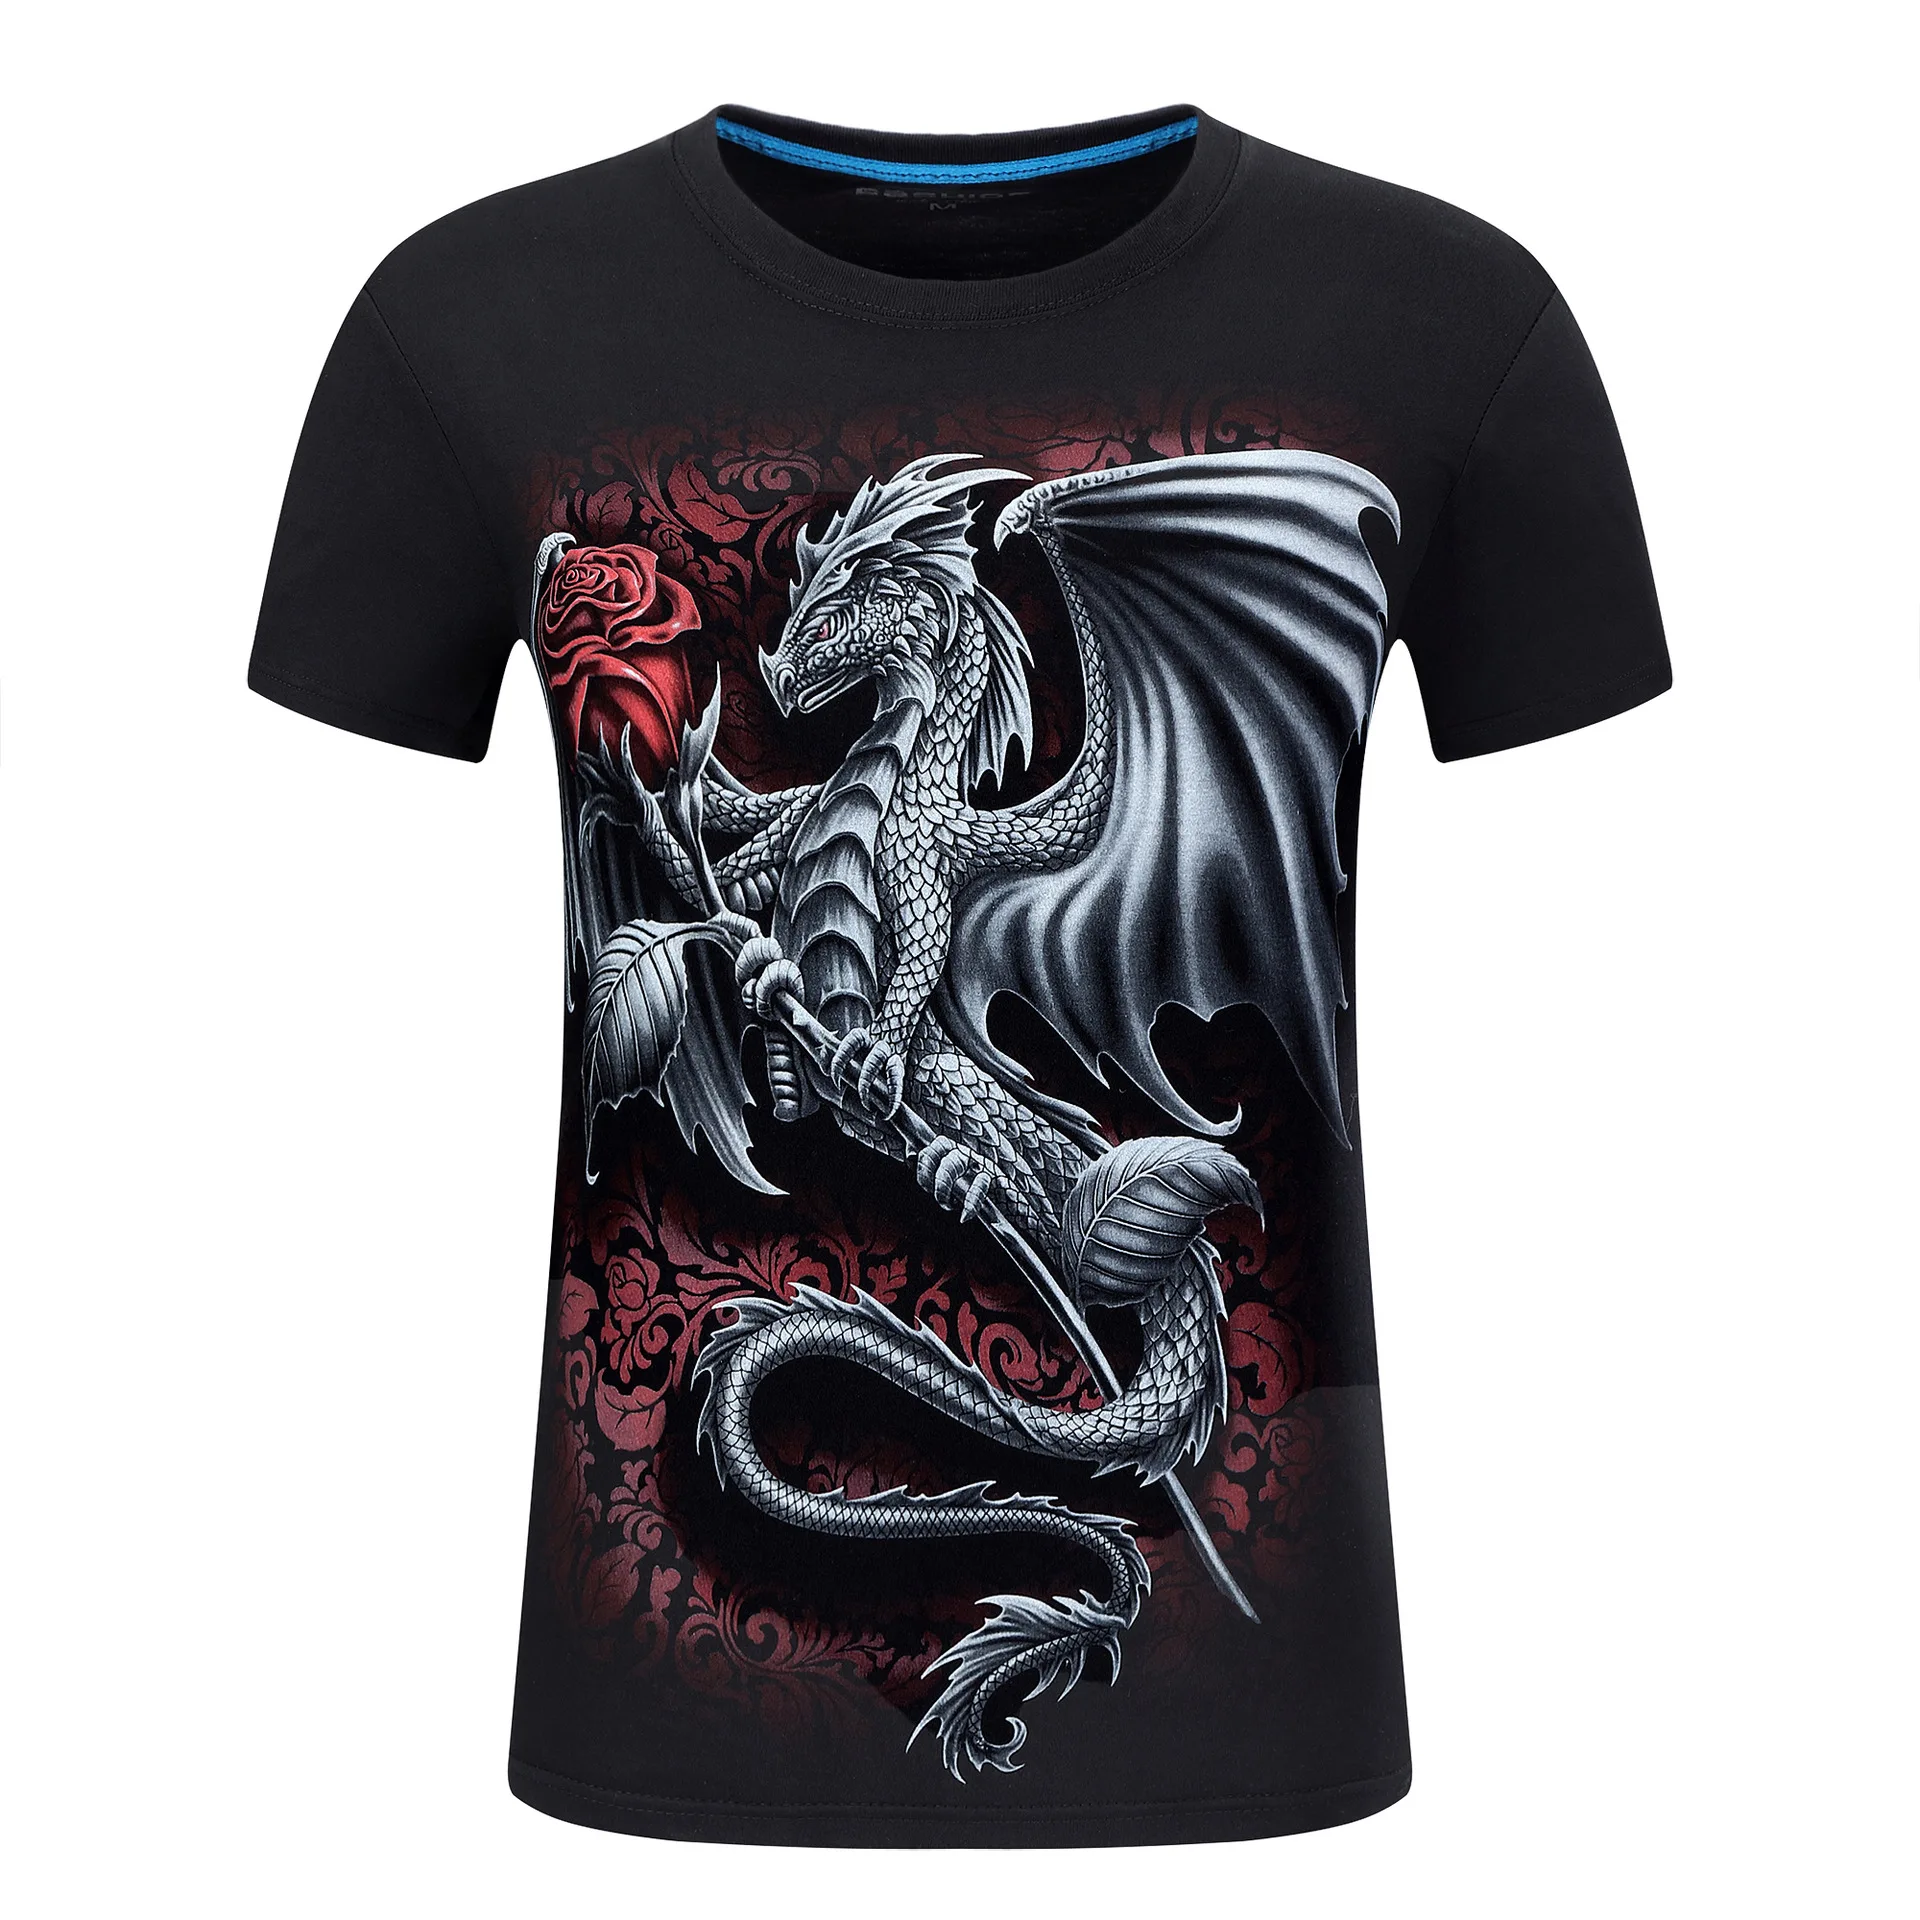 

419 Newest 3D Printed T-Shirt Ink Draw Pattern Short Sleeve Summer Casual Tops Tees Fashion O-Neck Tshirt Male